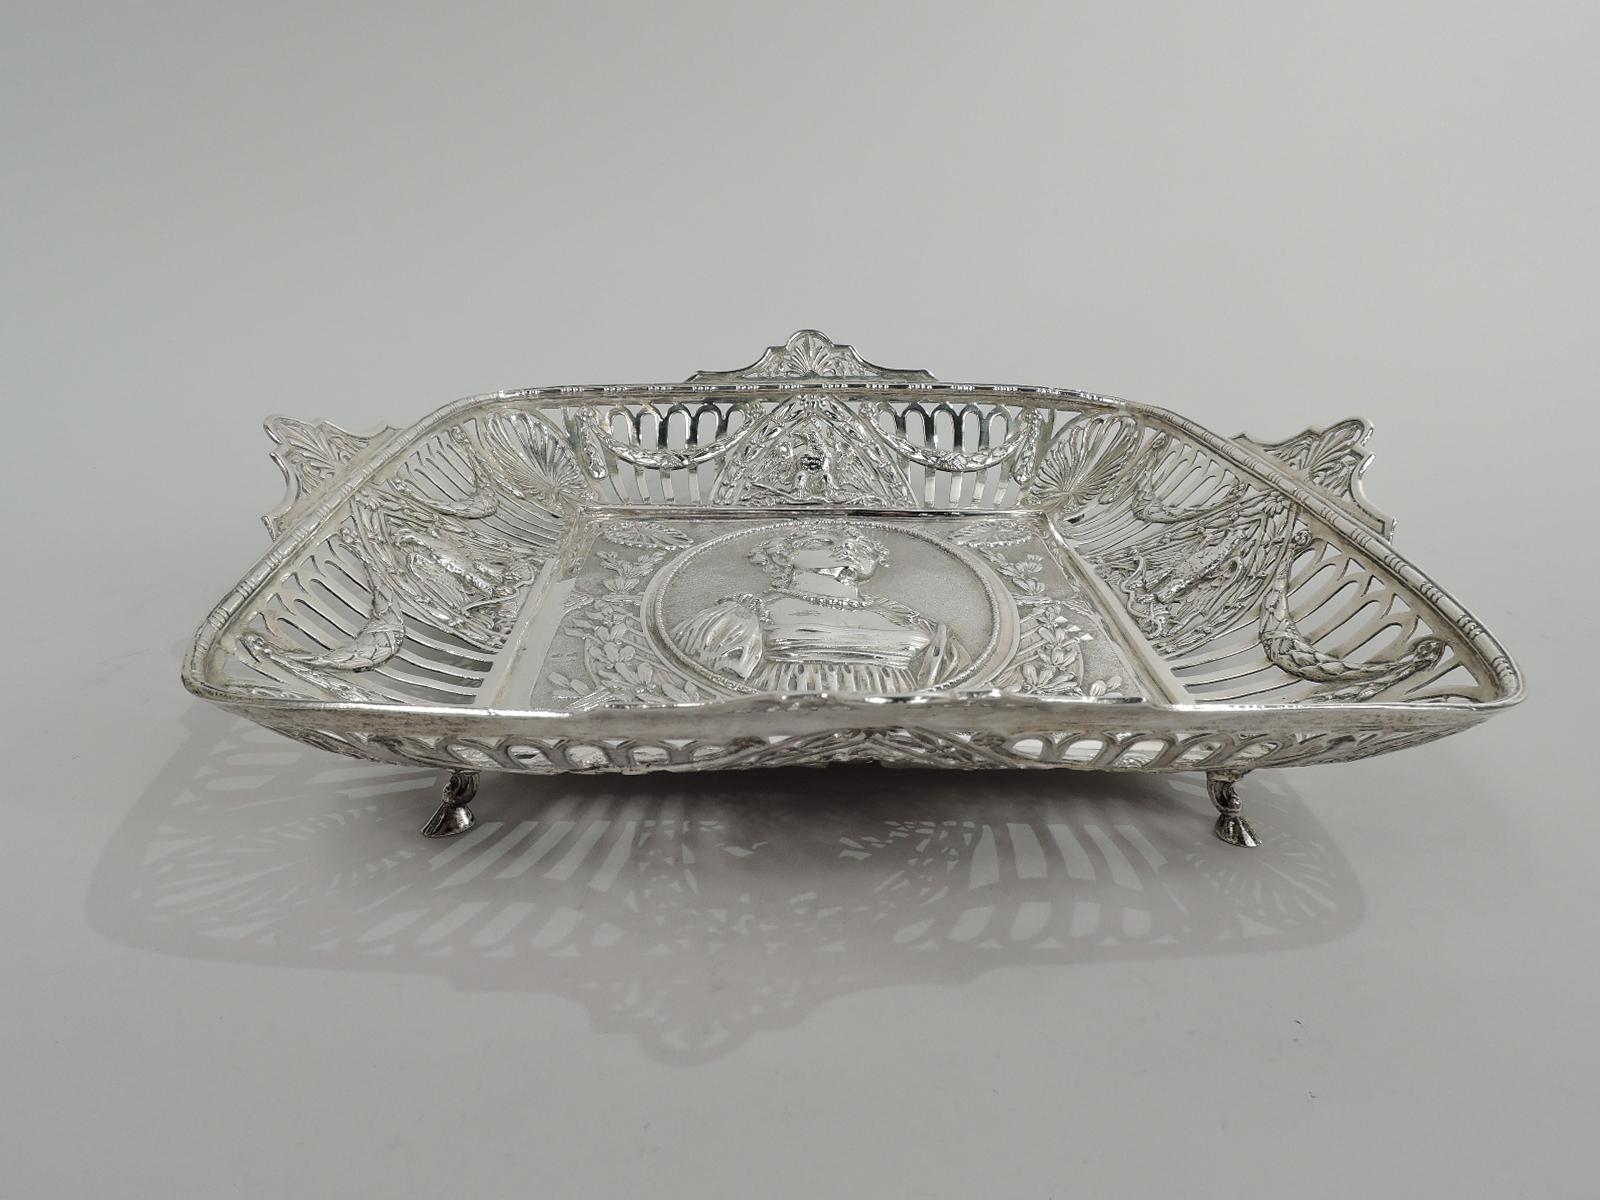 German 800 silver bowl with Napoleonic theme, ca 1910. Square. Sides tapering with open arcade interspersed with imperial eagles and corner palmettes and overlaid with swags. Bead-and-reel rim has curvilinear mounts inset with palmette. Well has